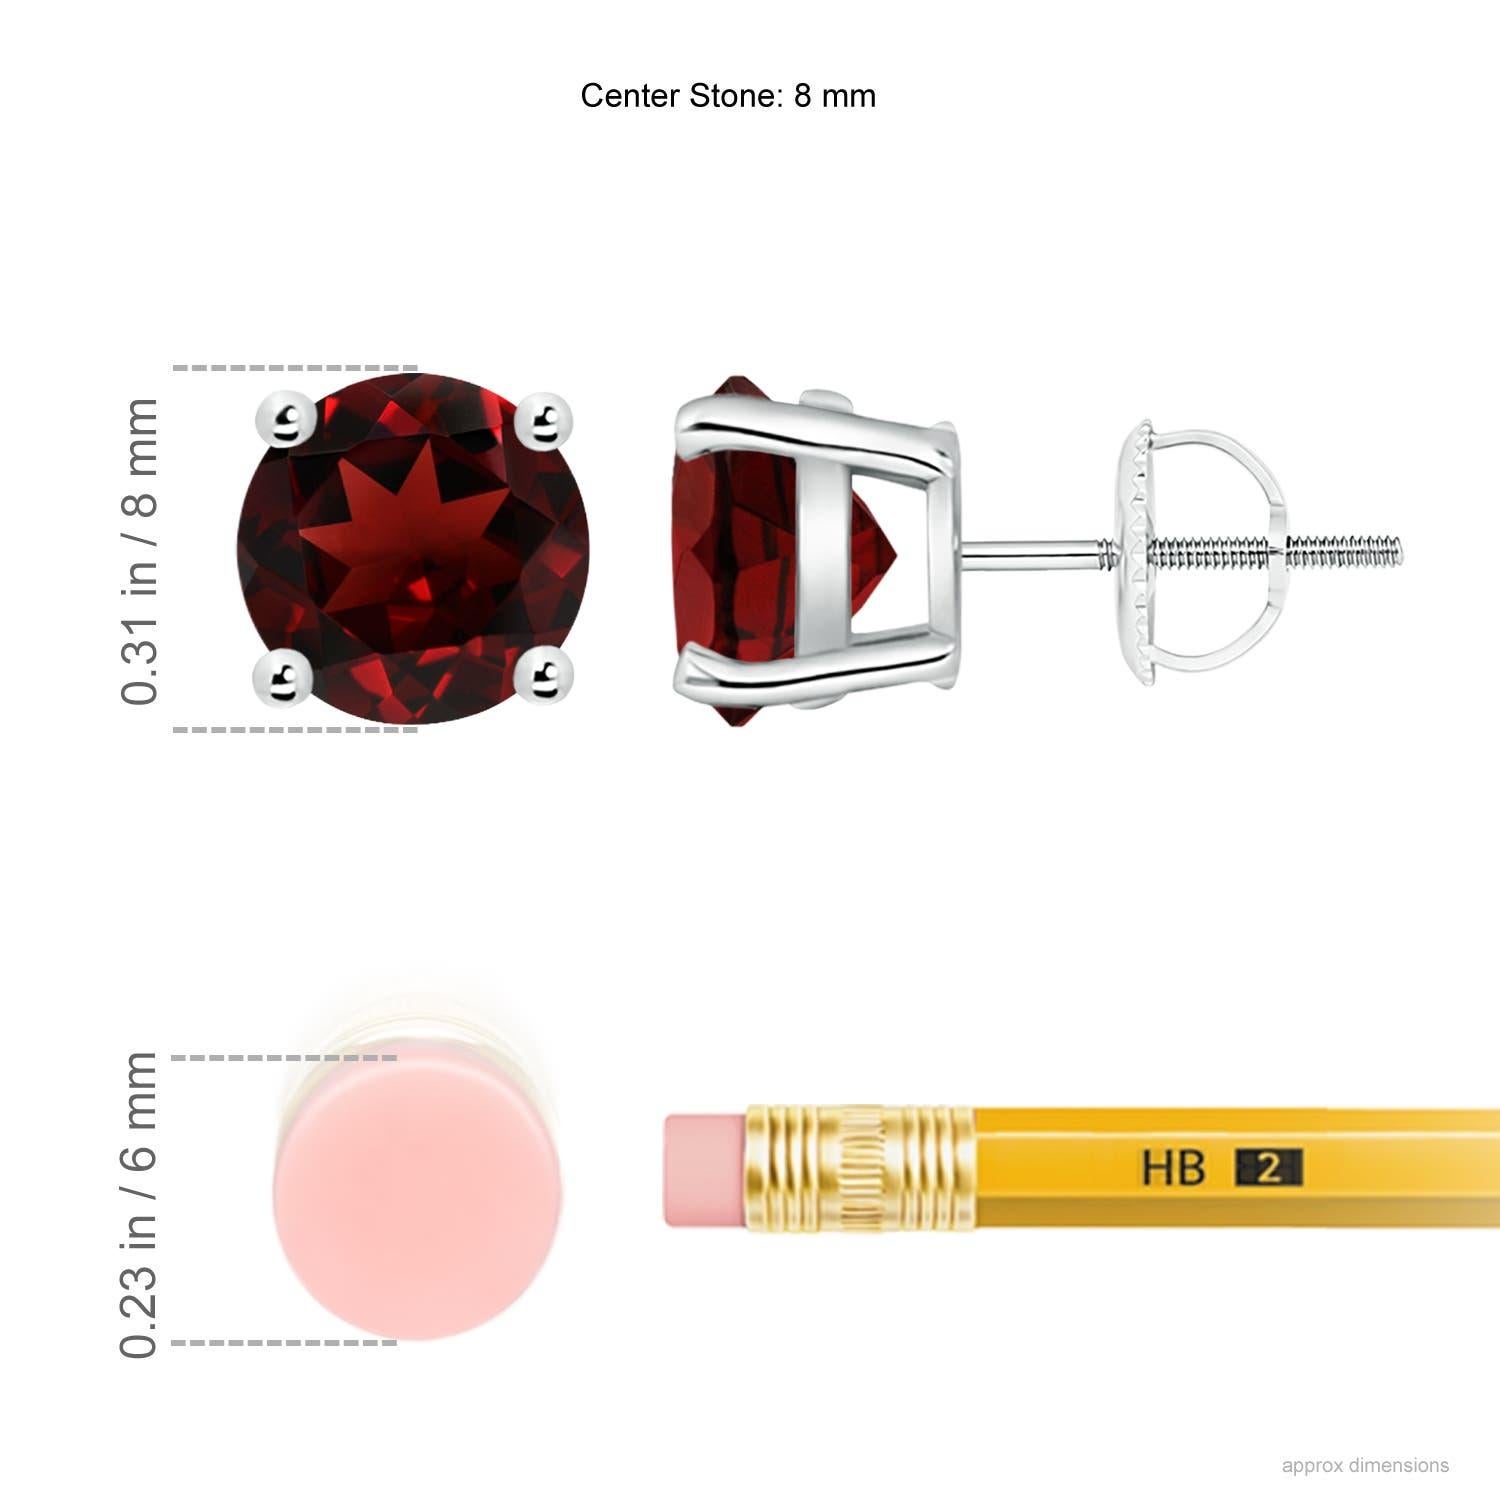 The beauty of these classic garnet stud earrings lies in their simple design and deep red hue. Secured in a 14K white gold basket prong setting, the round garnets look elegant.